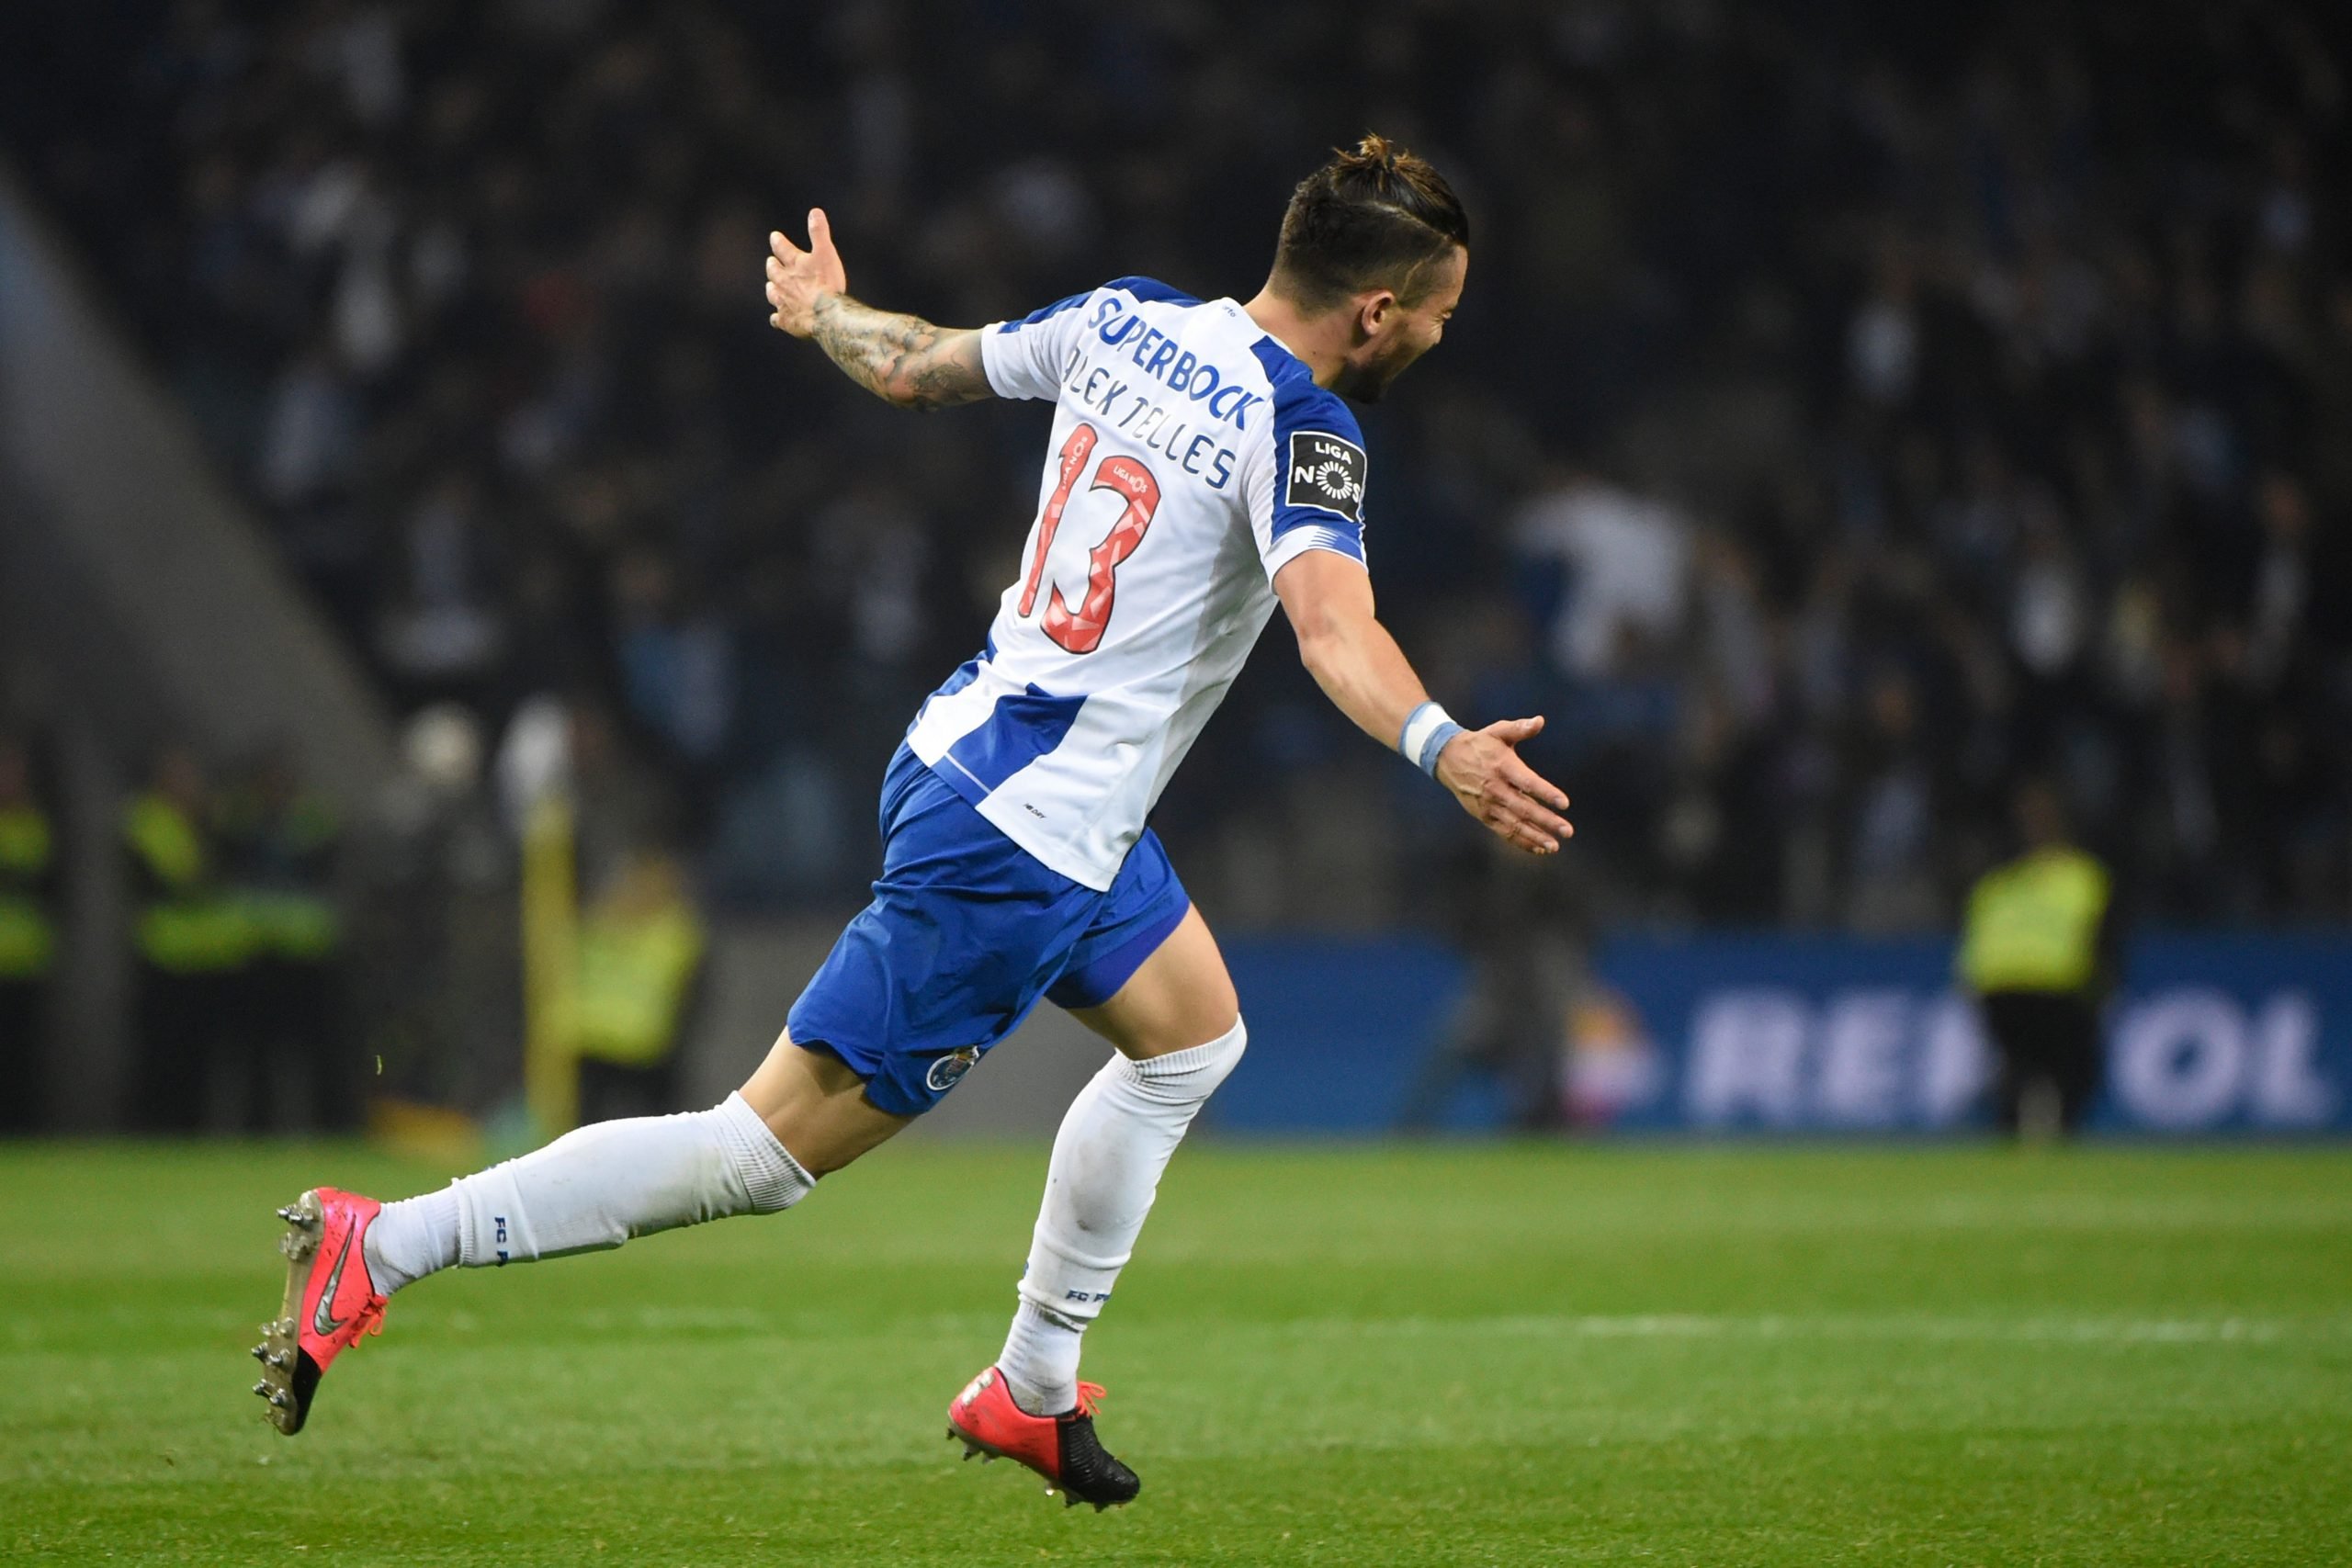 FC Porto's Brazilian defender Alex Telles celebrates after scoring a goal during the Portuguese league football match between FC Porto and Portimonense SC at the Dragao stadium in Porto on February 23, 2020. (Photo by MIGUEL RIOPA/AFP via Getty Images)